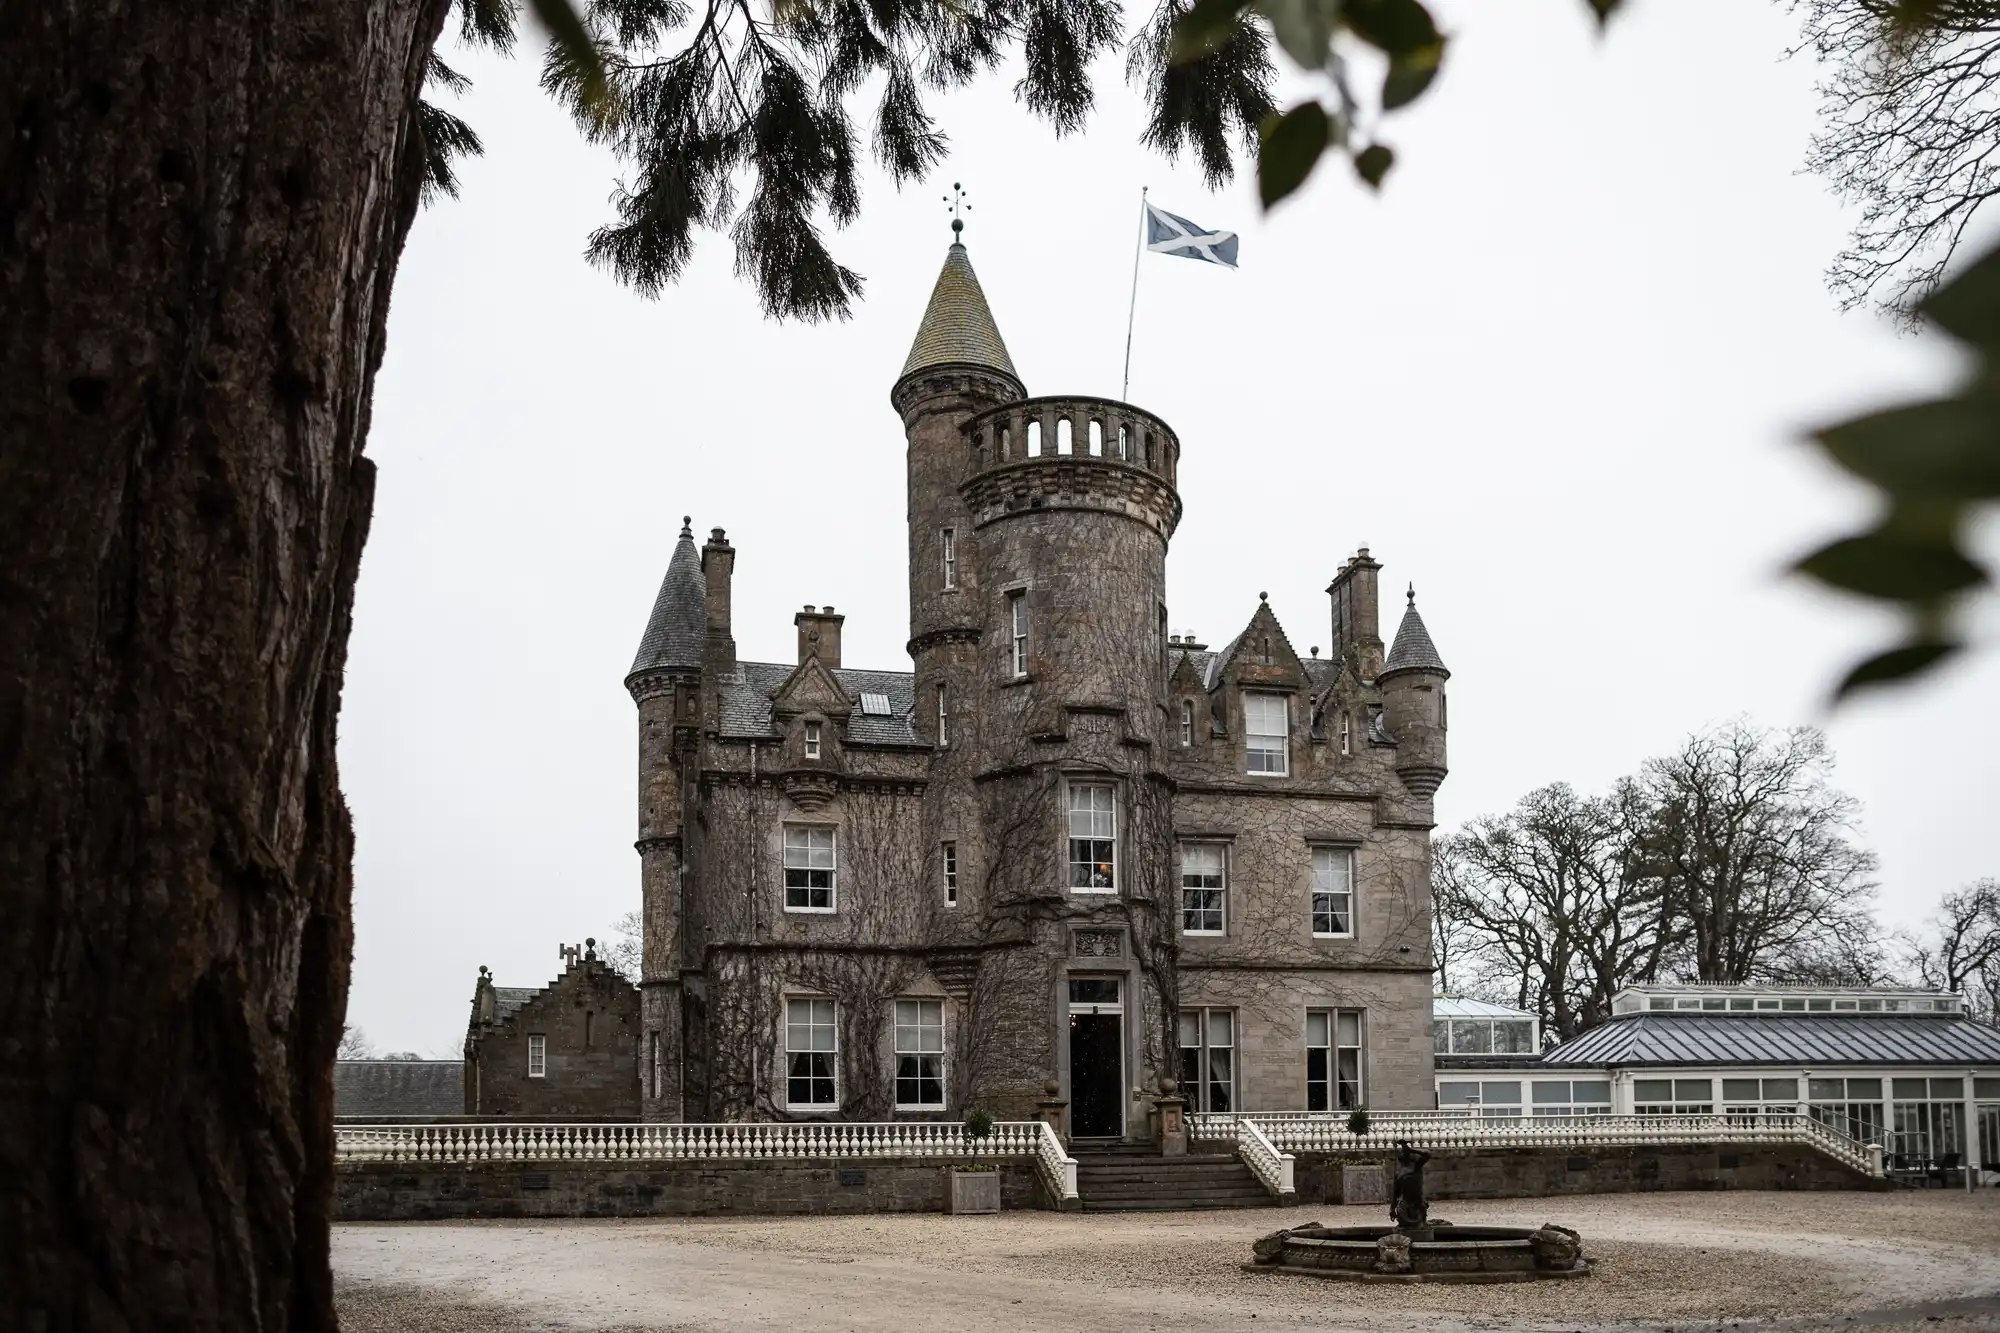 A stone castle with turrets and an entrance staircase, flying a Scottish flag, is surrounded by bare trees on a cloudy day.